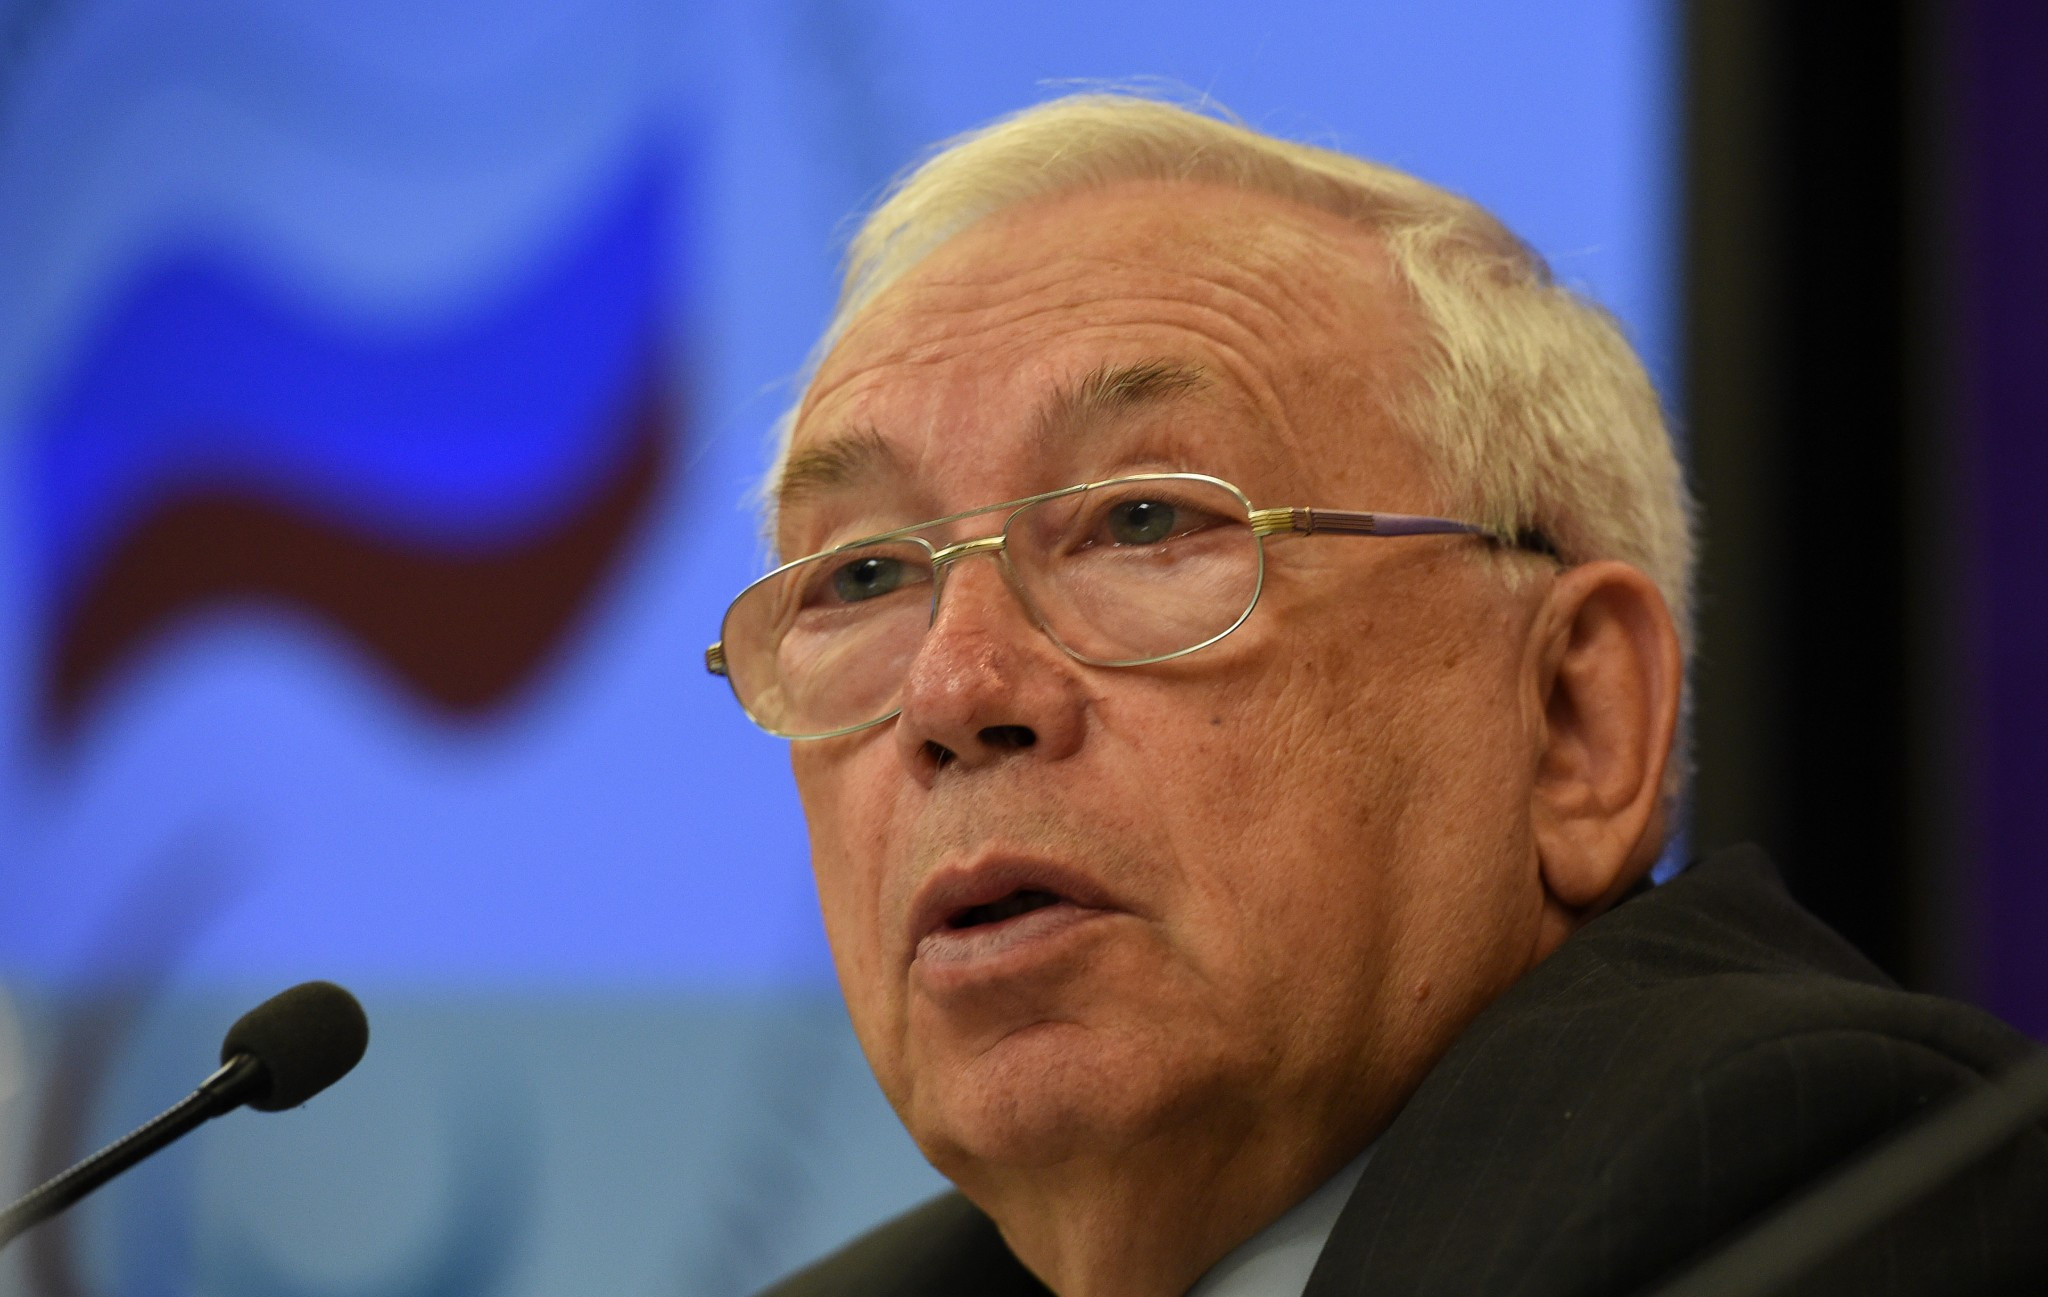 Russian Paralympic Committee President admits some IPC reinstatement criteria remains unresolved